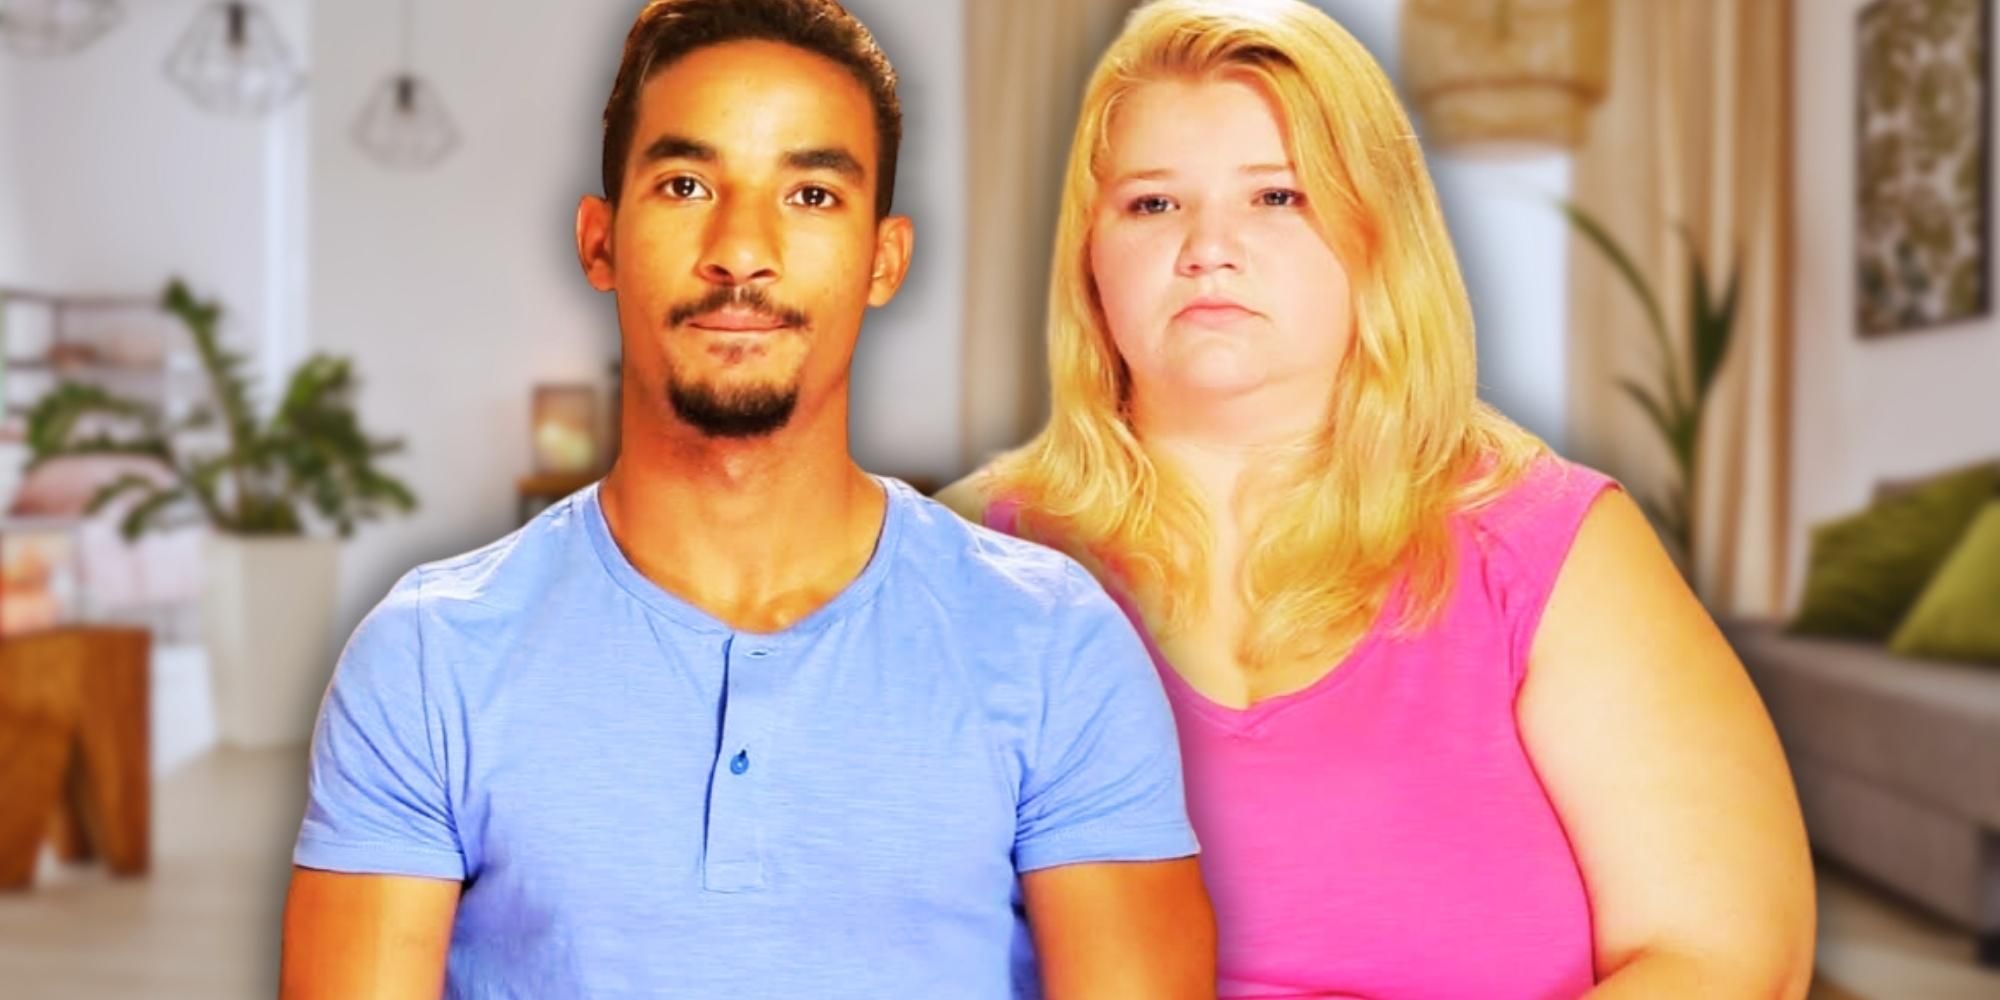 90 Day Fiancé Nicole Nafziger and Azan Tefou wearing pink and blue outfits